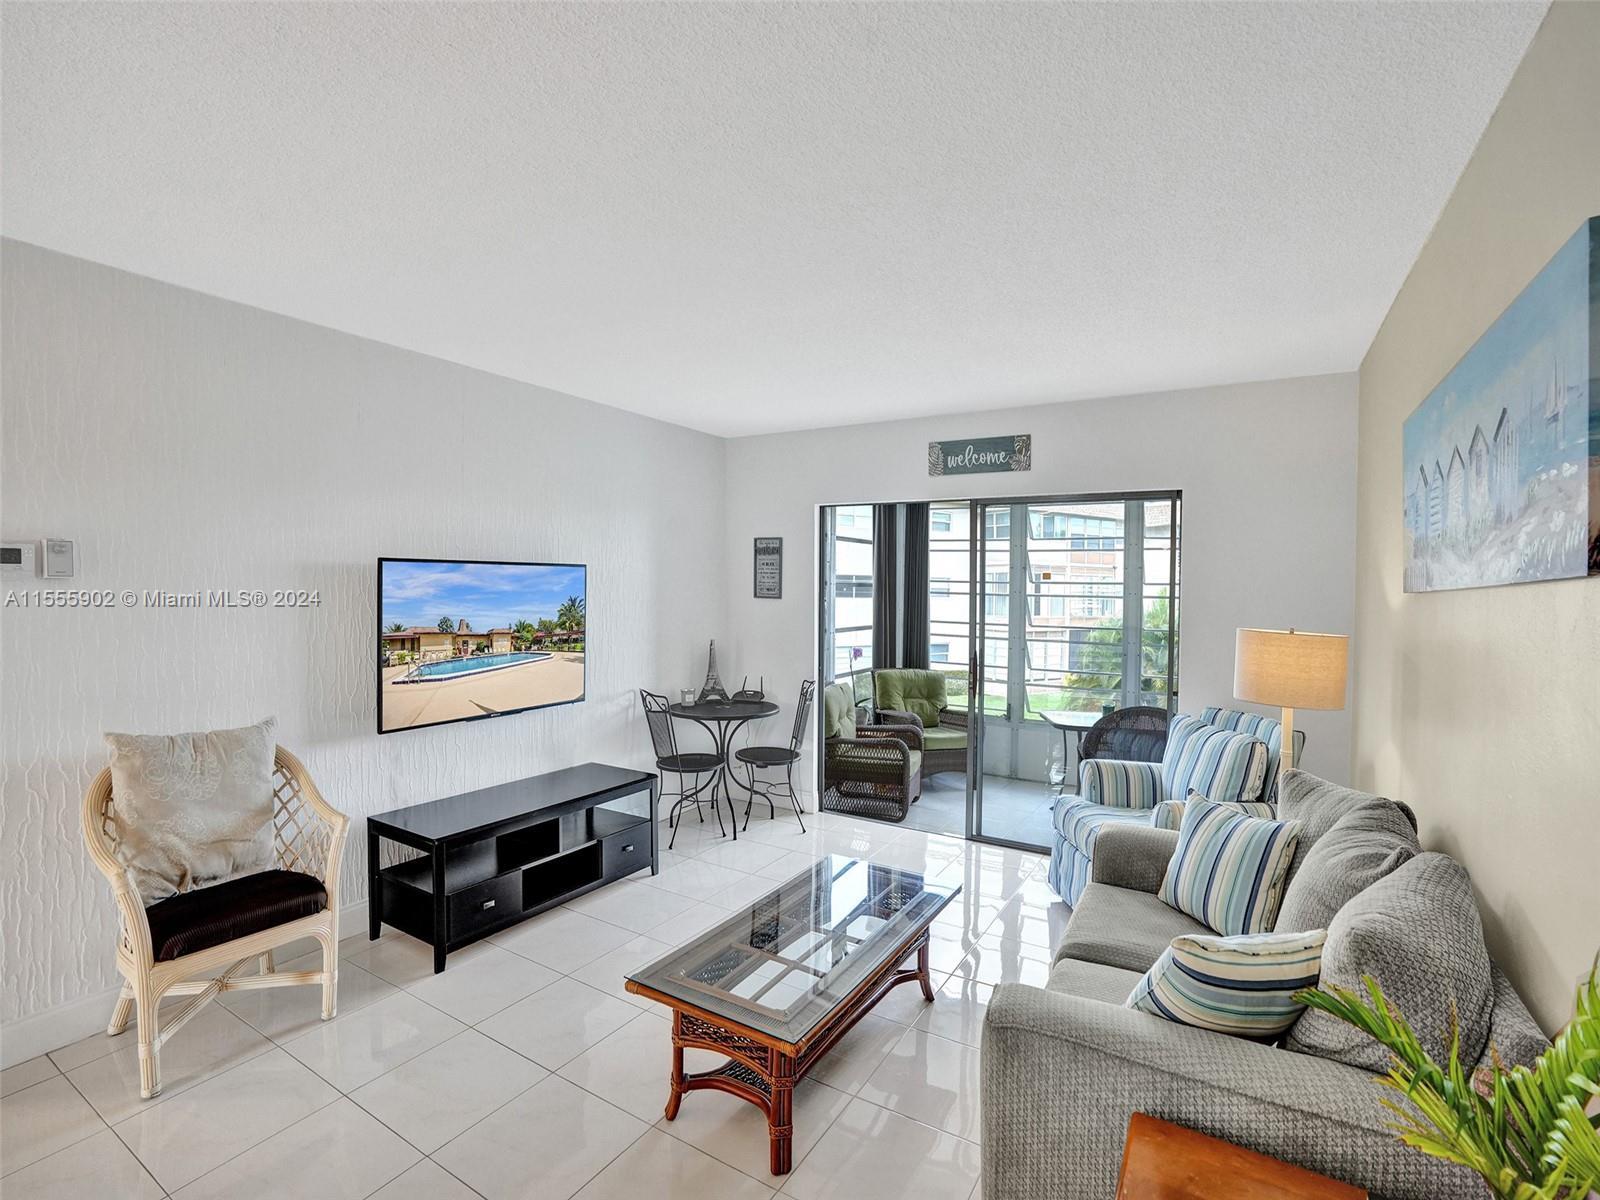 Photo of 4805 NW 35th St #503 in Lauderdale Lakes, FL